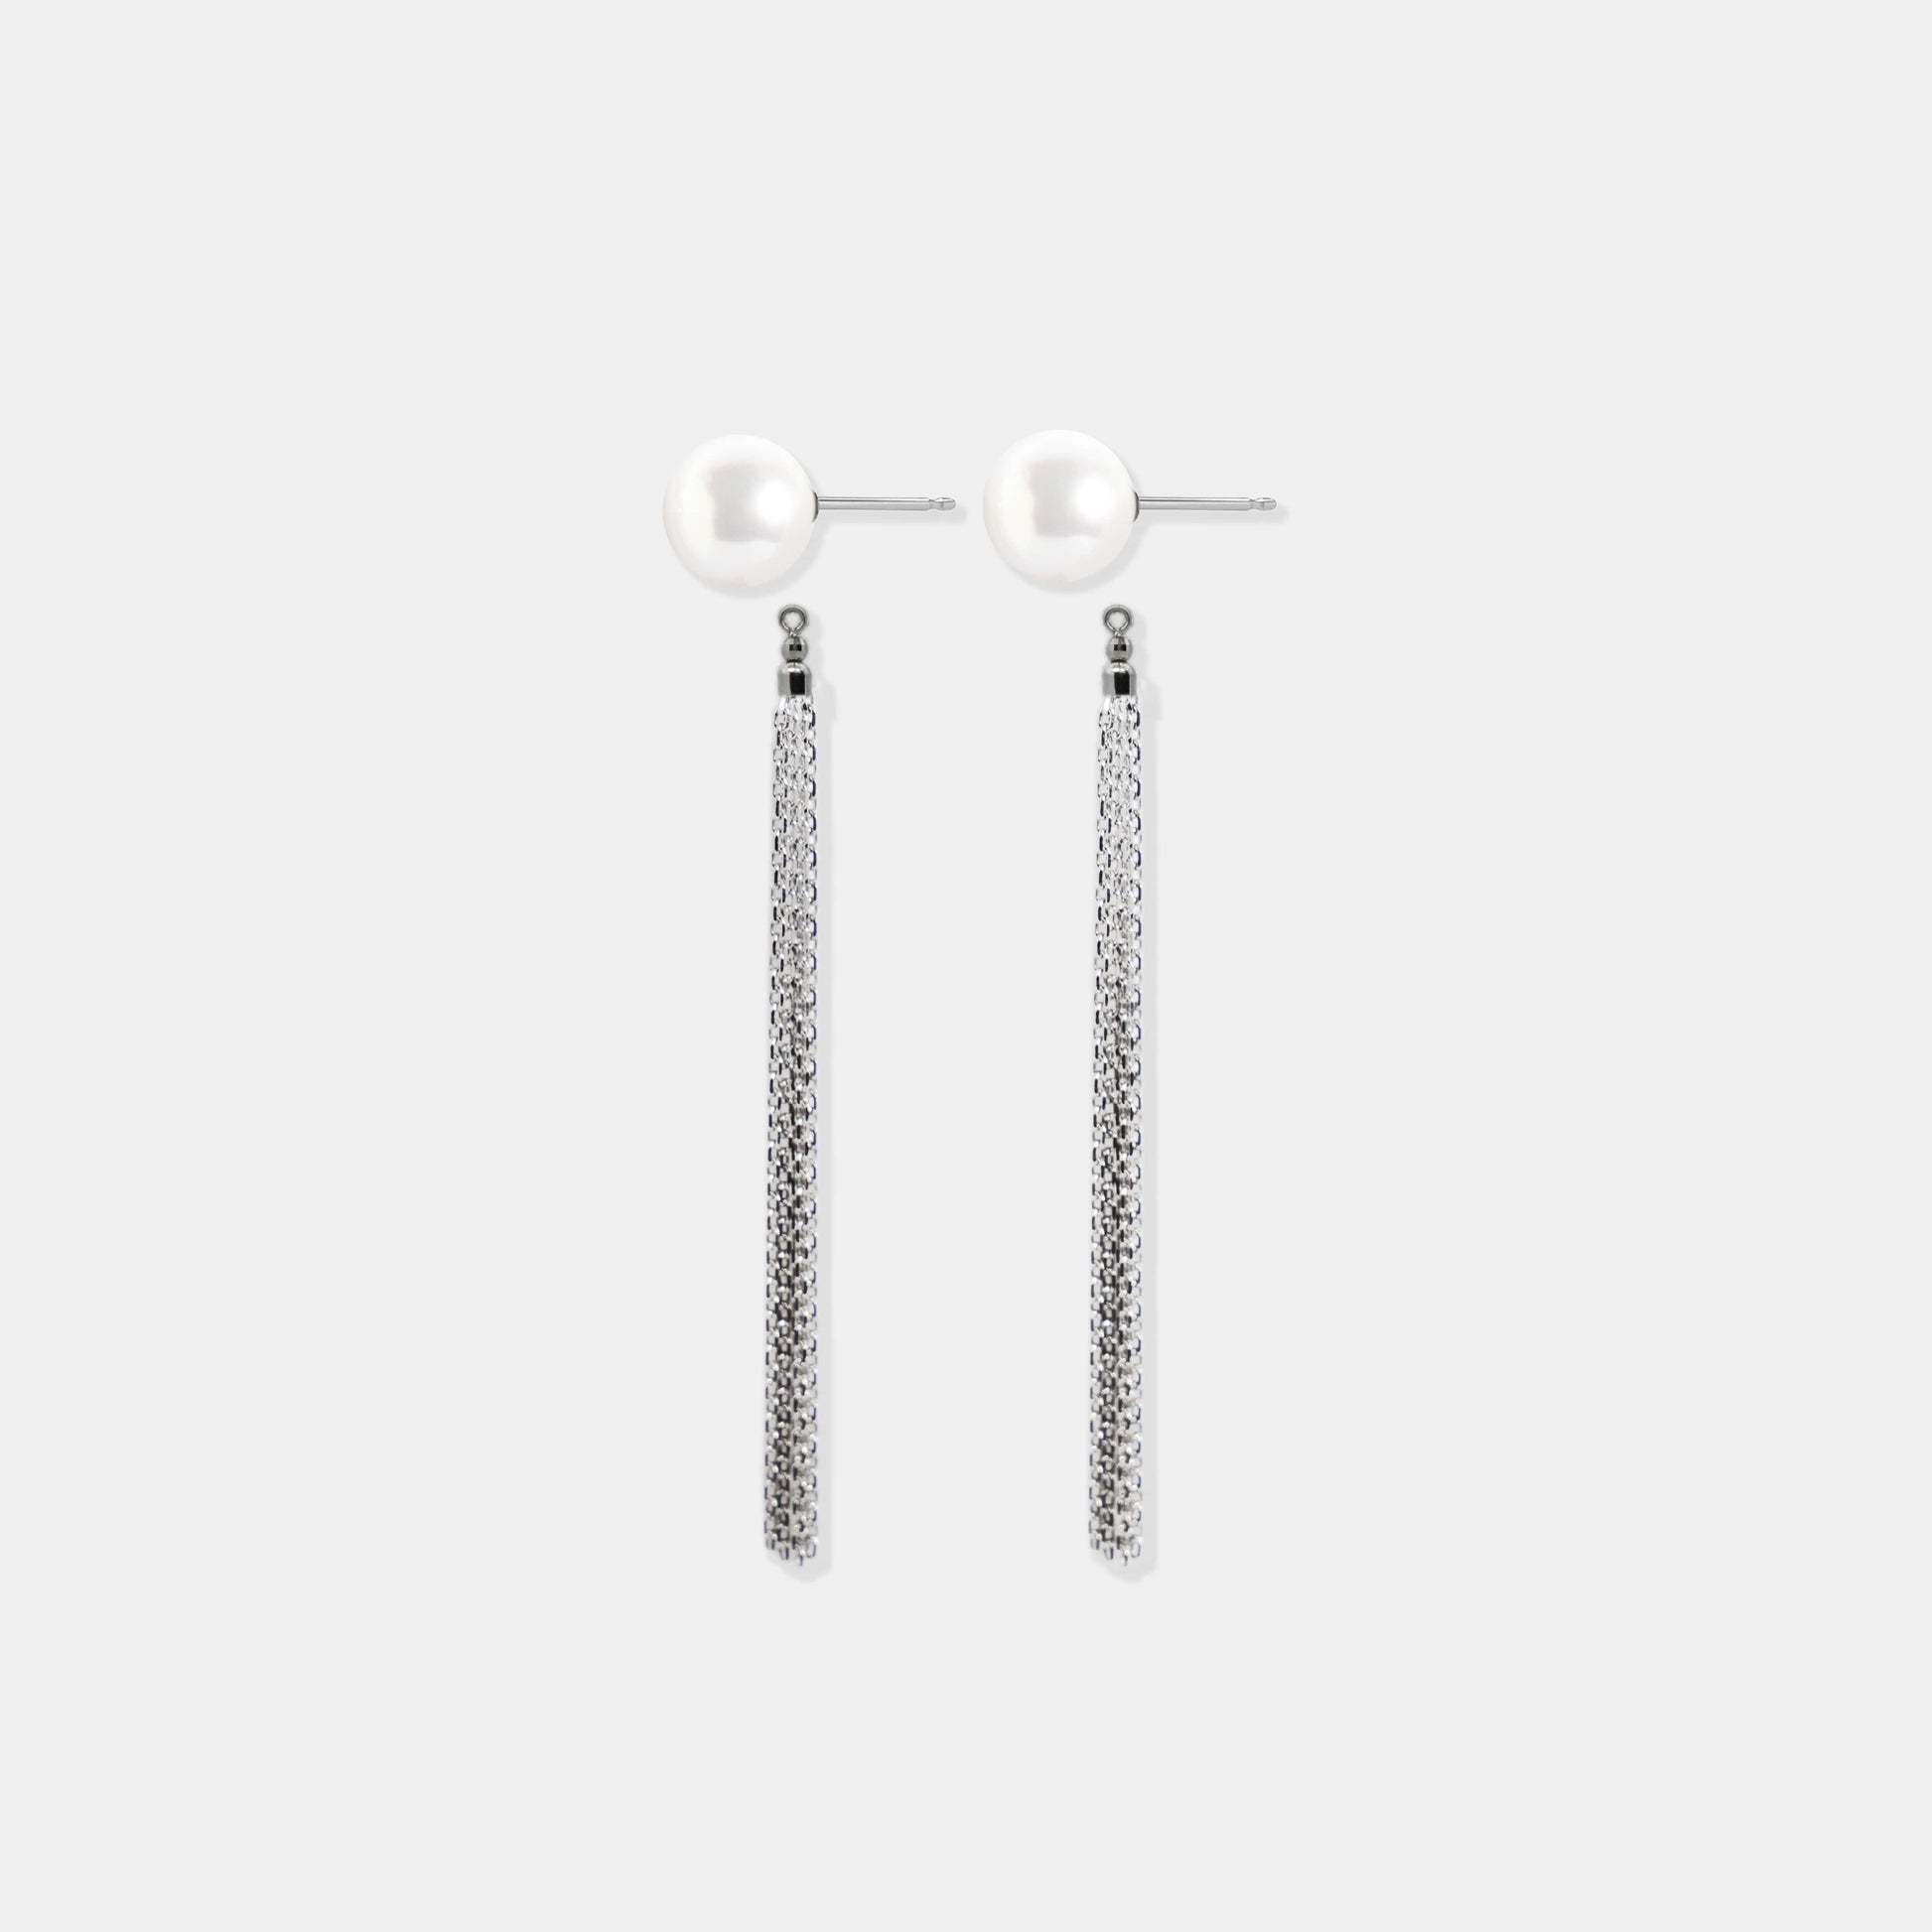 Stylish platinum earrings adorned with pearl and chain, showcasing Pearl + Fringe Piercing.